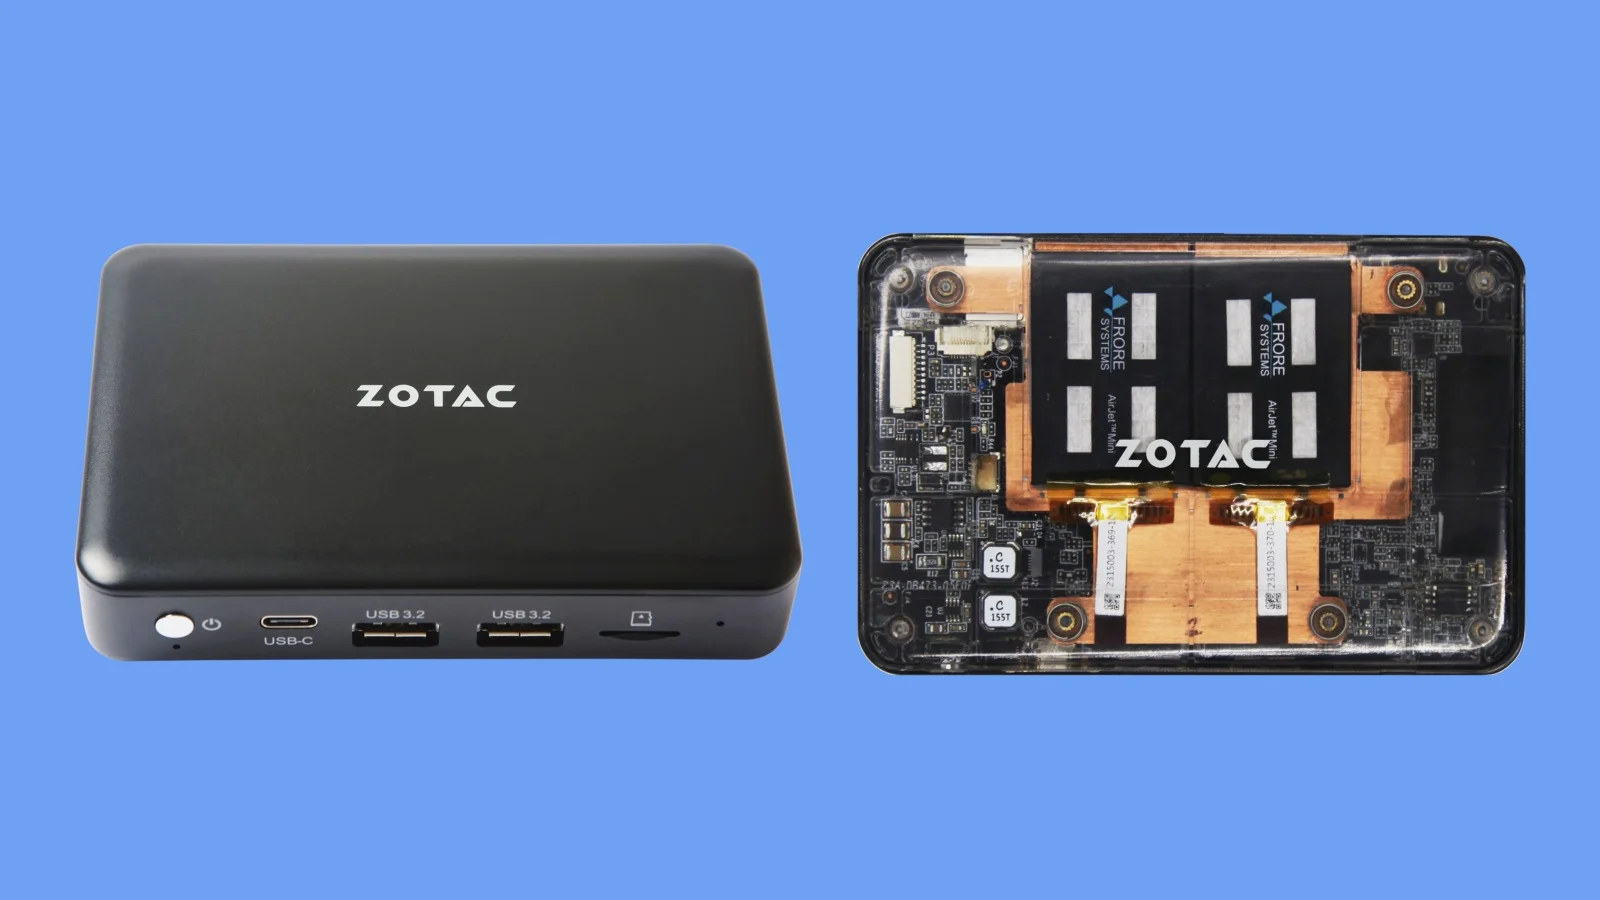 Zotac PI430AJ Pico mini PC features solid-state cooling chips - CNX Software